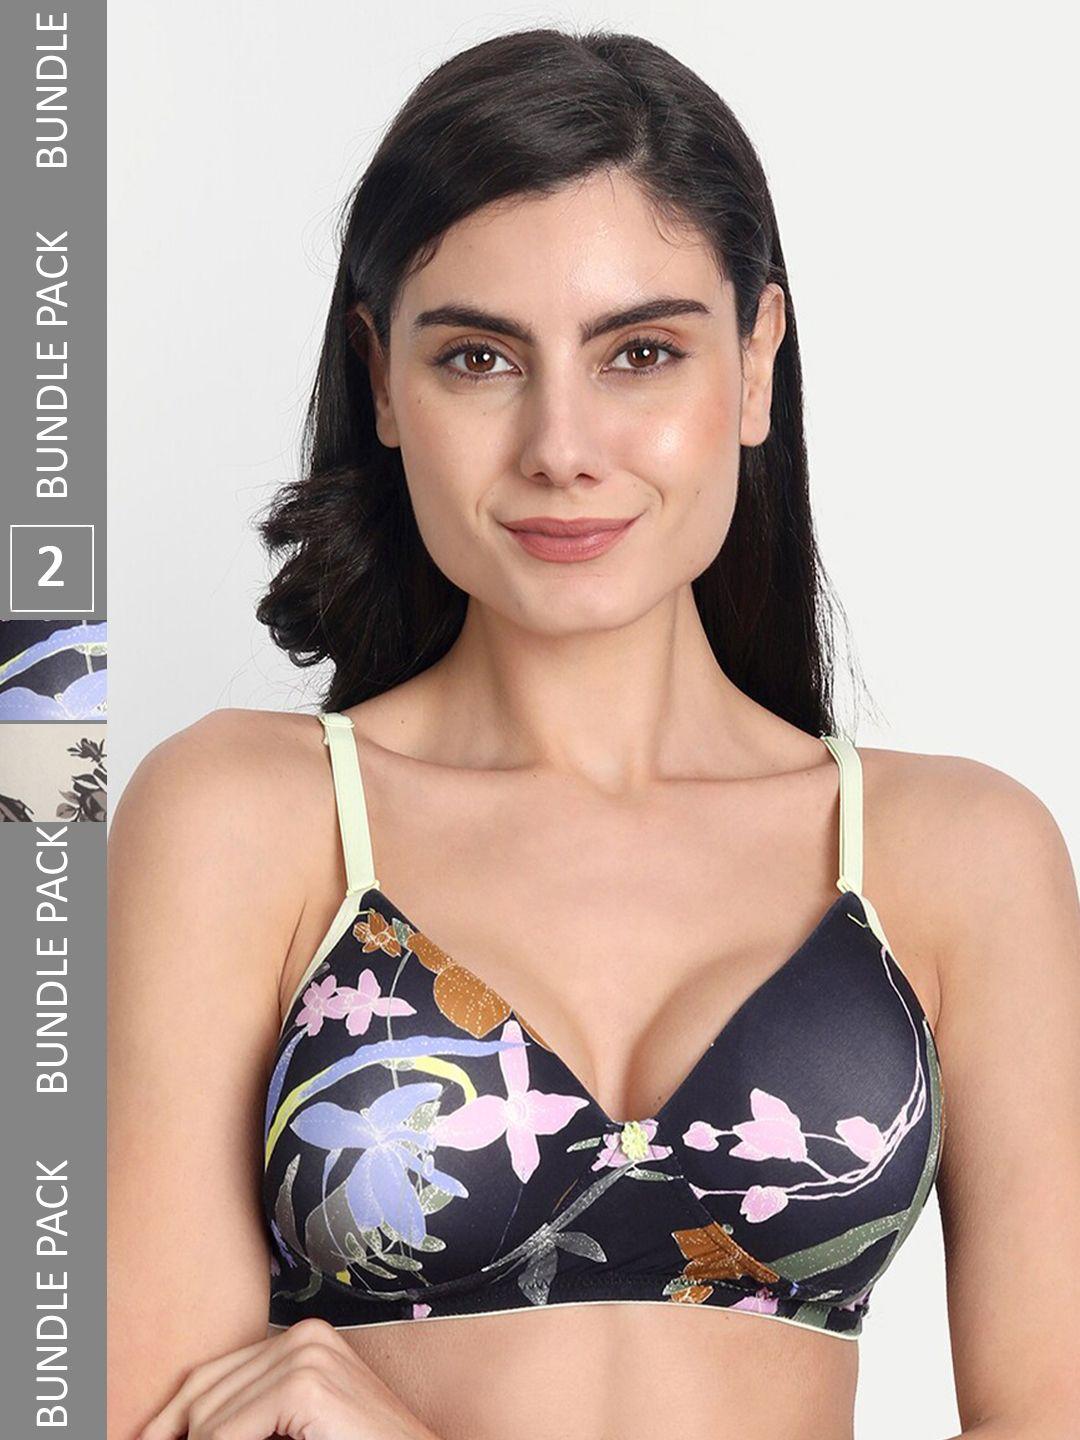 aimly pack of 2 abstract printed dry fit padded non-wired full coverage push-up bra